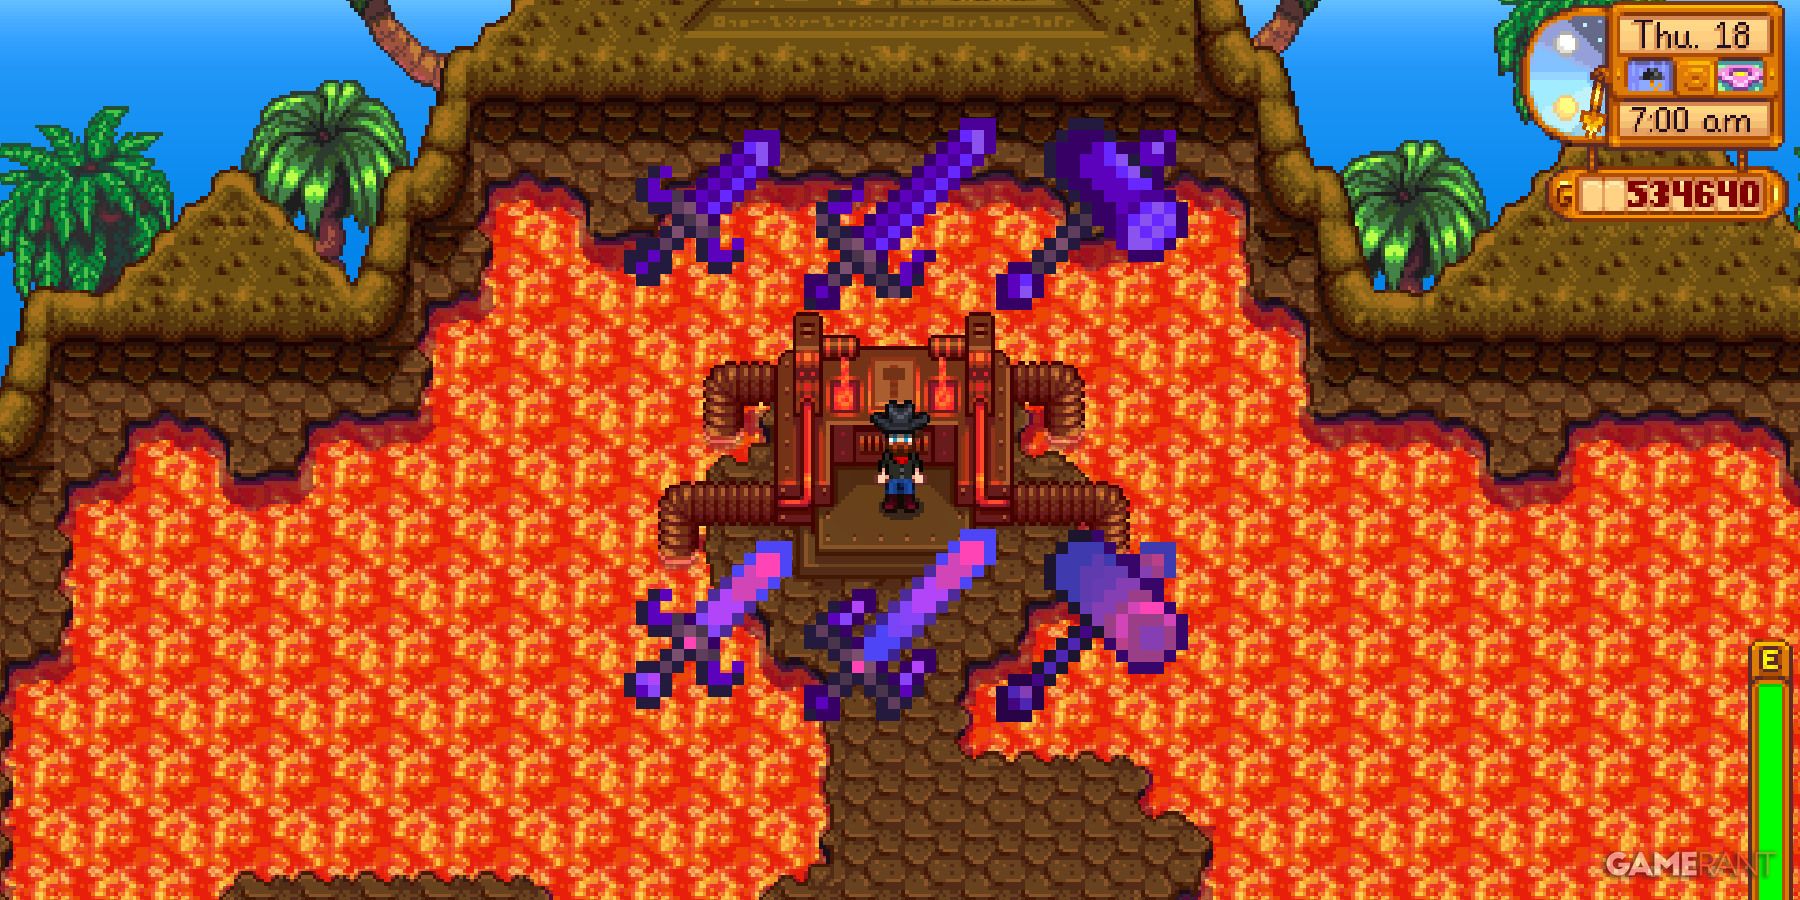 Galaxy Weapons in Stardew Valley